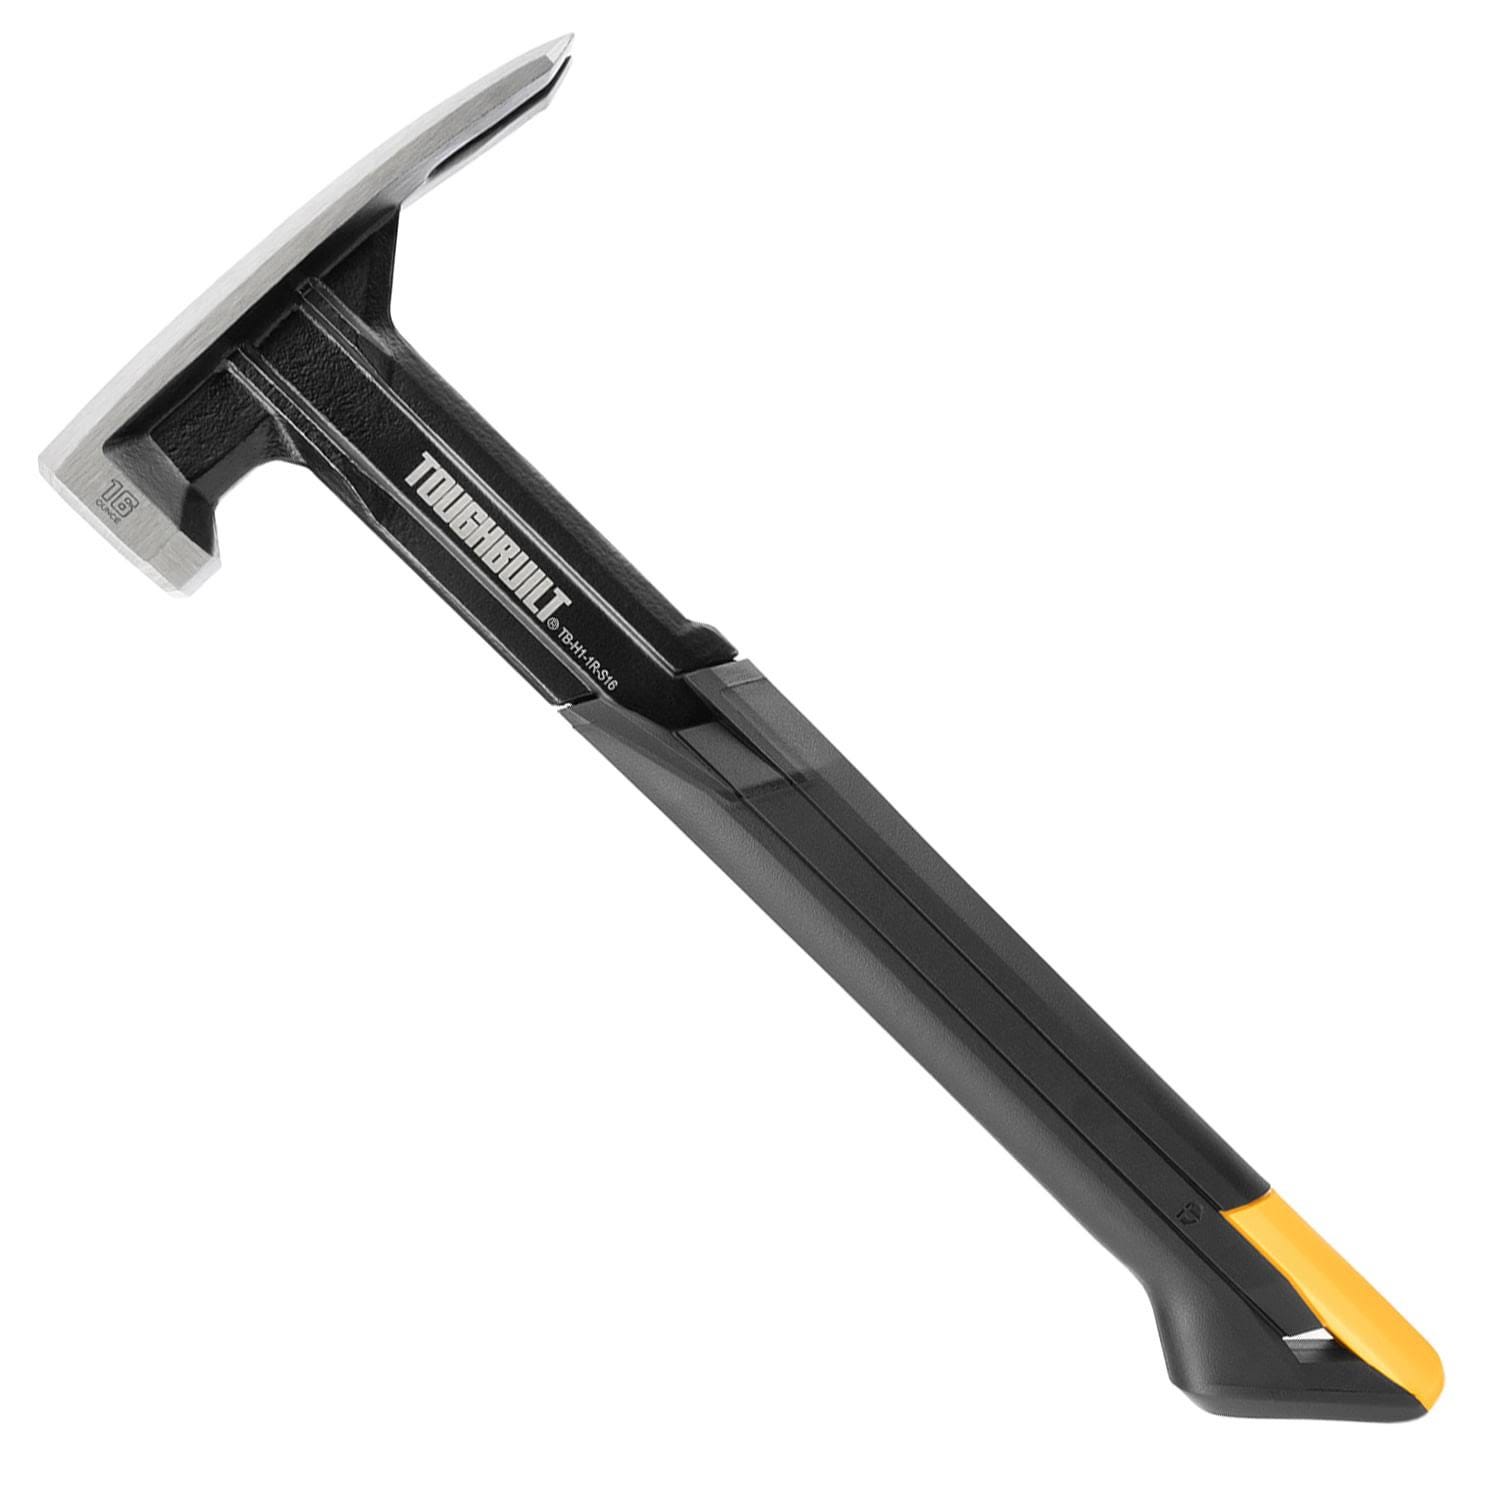 Toughbuilt 16 oz Smooth Face Steel Head Rubber Rip Framing Hammer | Image